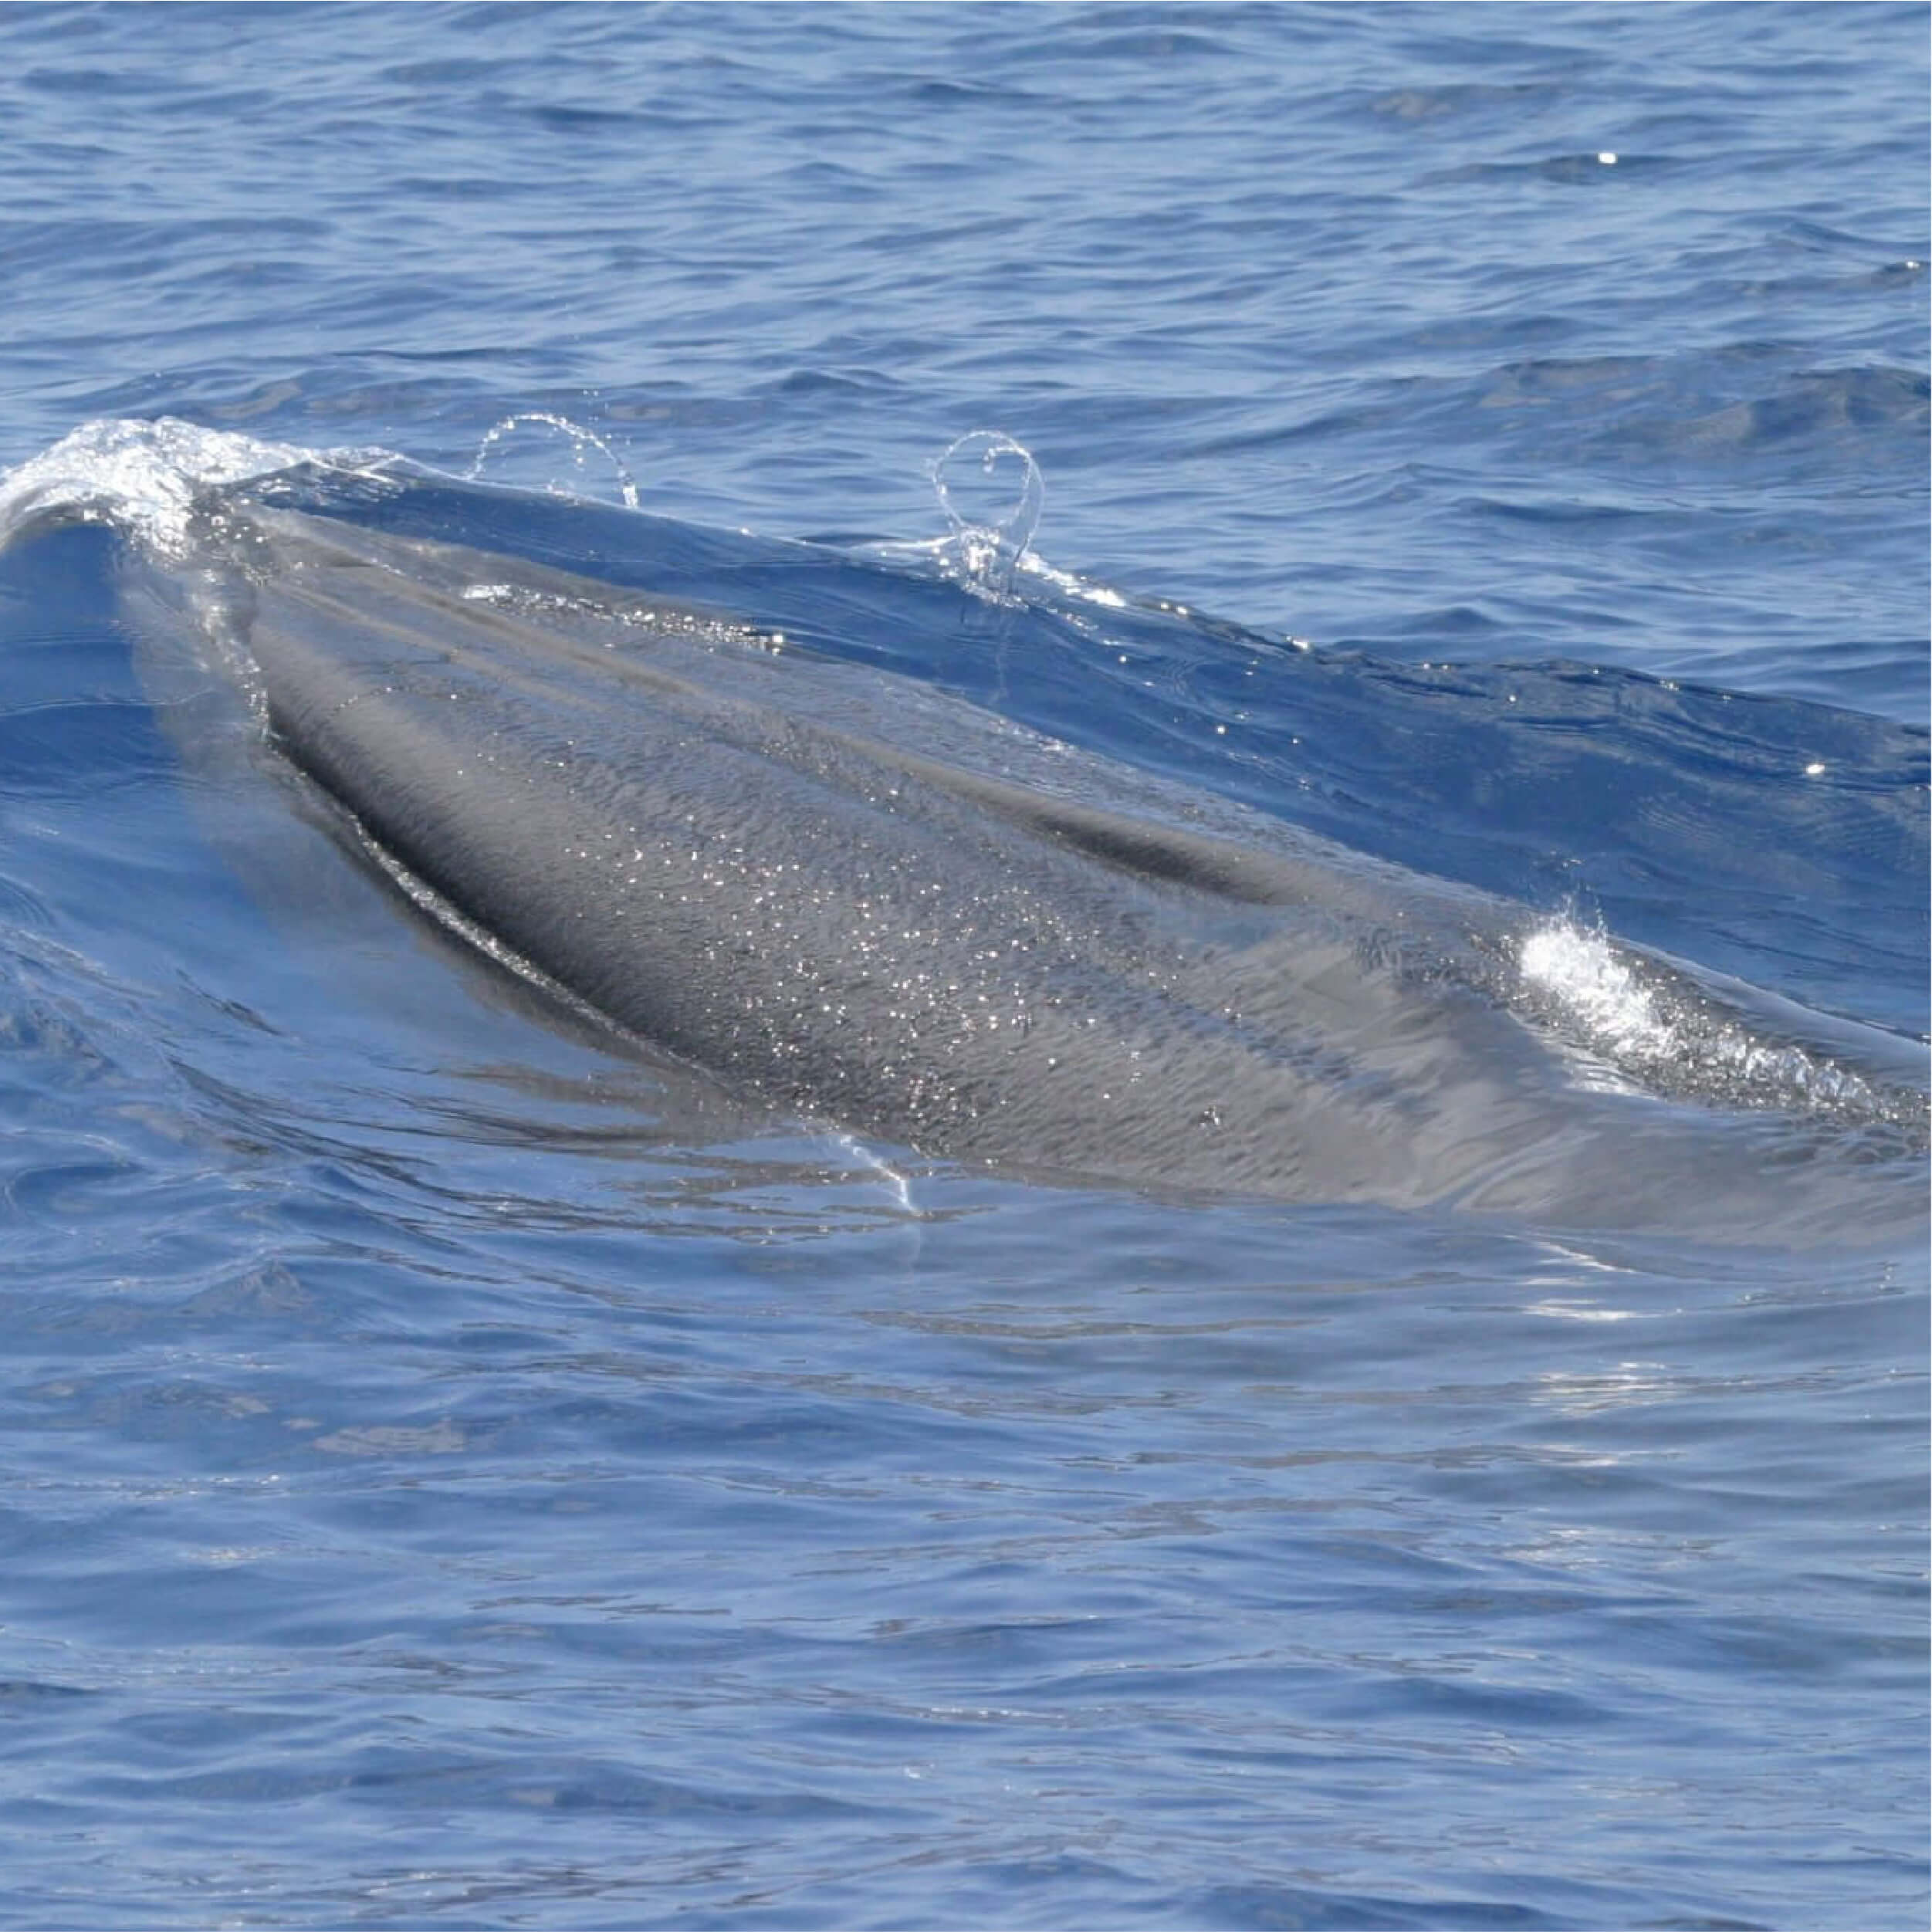 Northern Gulf of Mexcio Bryde's/Rice's whale surfacing (NOAA SEFSC Permit No. 779-1633-00)